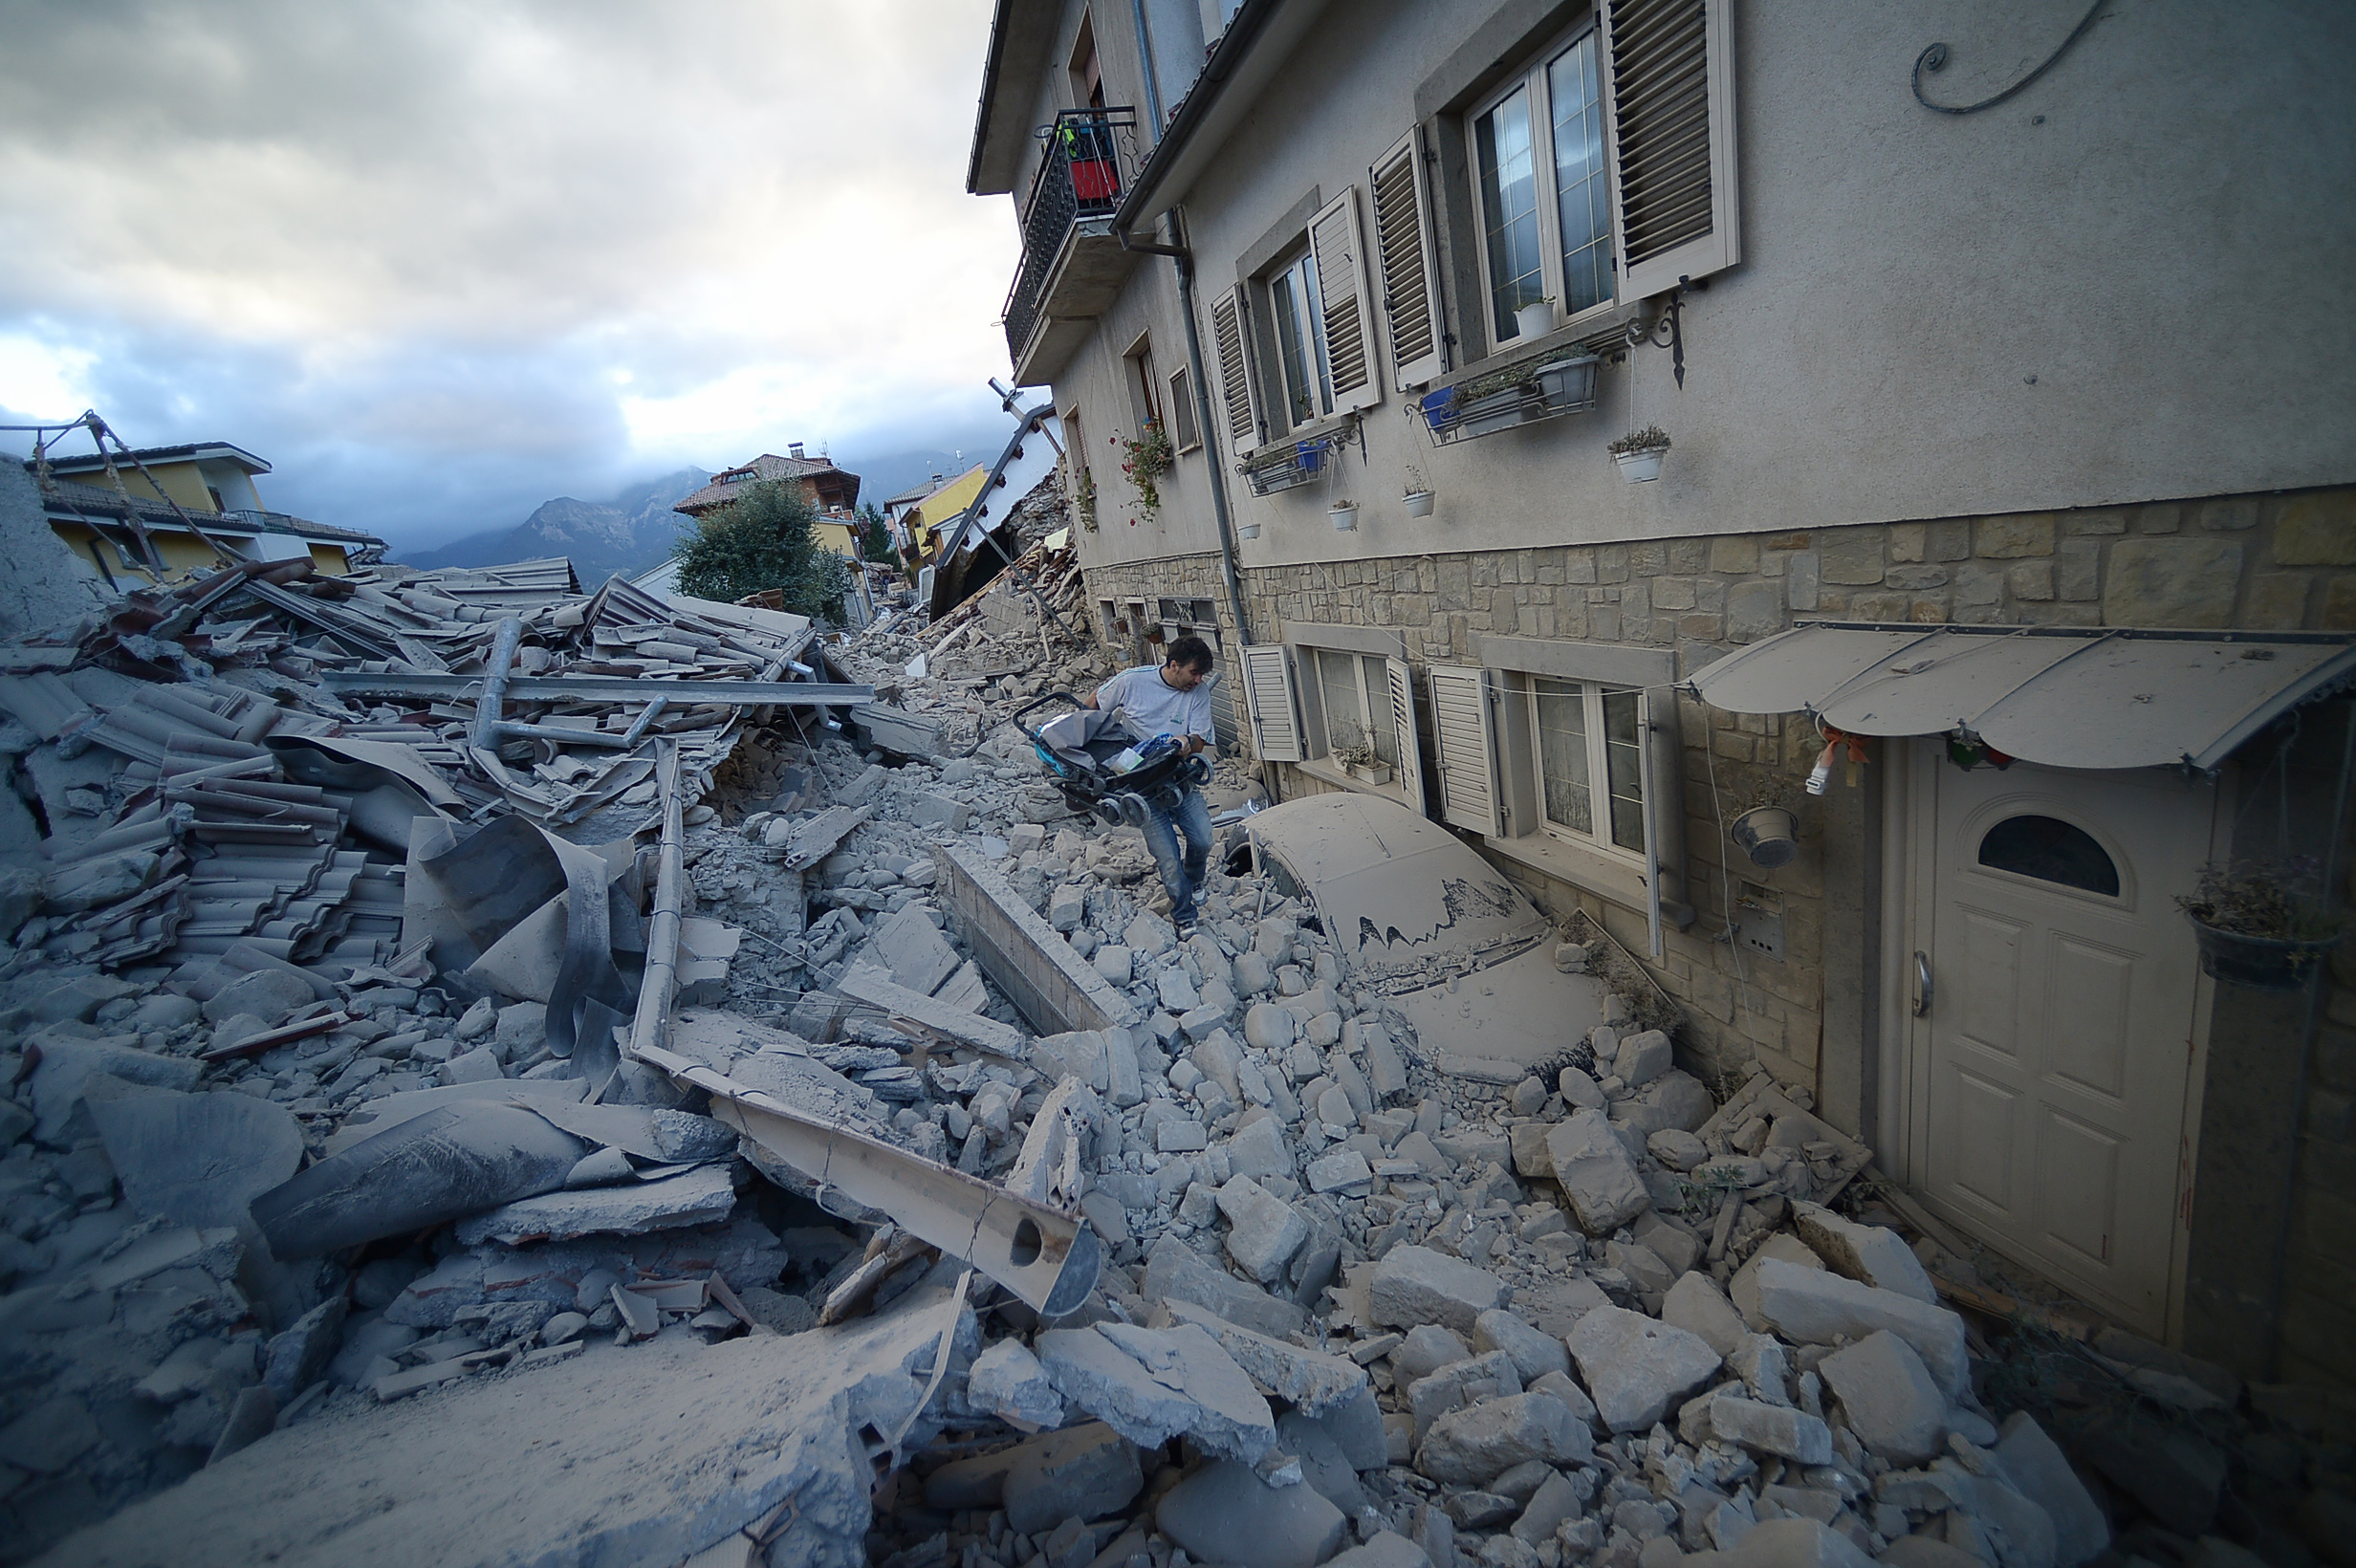 A resident carries a pram among damaged buildings after a strong heartquake hit Amatrice on August 24, 2016. Central Italy was struck by a powerful, 6.2-magnitude earthquake in the early hours, which has killed at least three people and devastated dozens of mountain villages. Numerous buildings had collapsed in communities close to the epicenter of the quake near the town of Norcia in the region of Umbria, witnesses told Italian media, with an increase in the death toll highly likely. / AFP PHOTO / FILIPPO MONTEFORTE